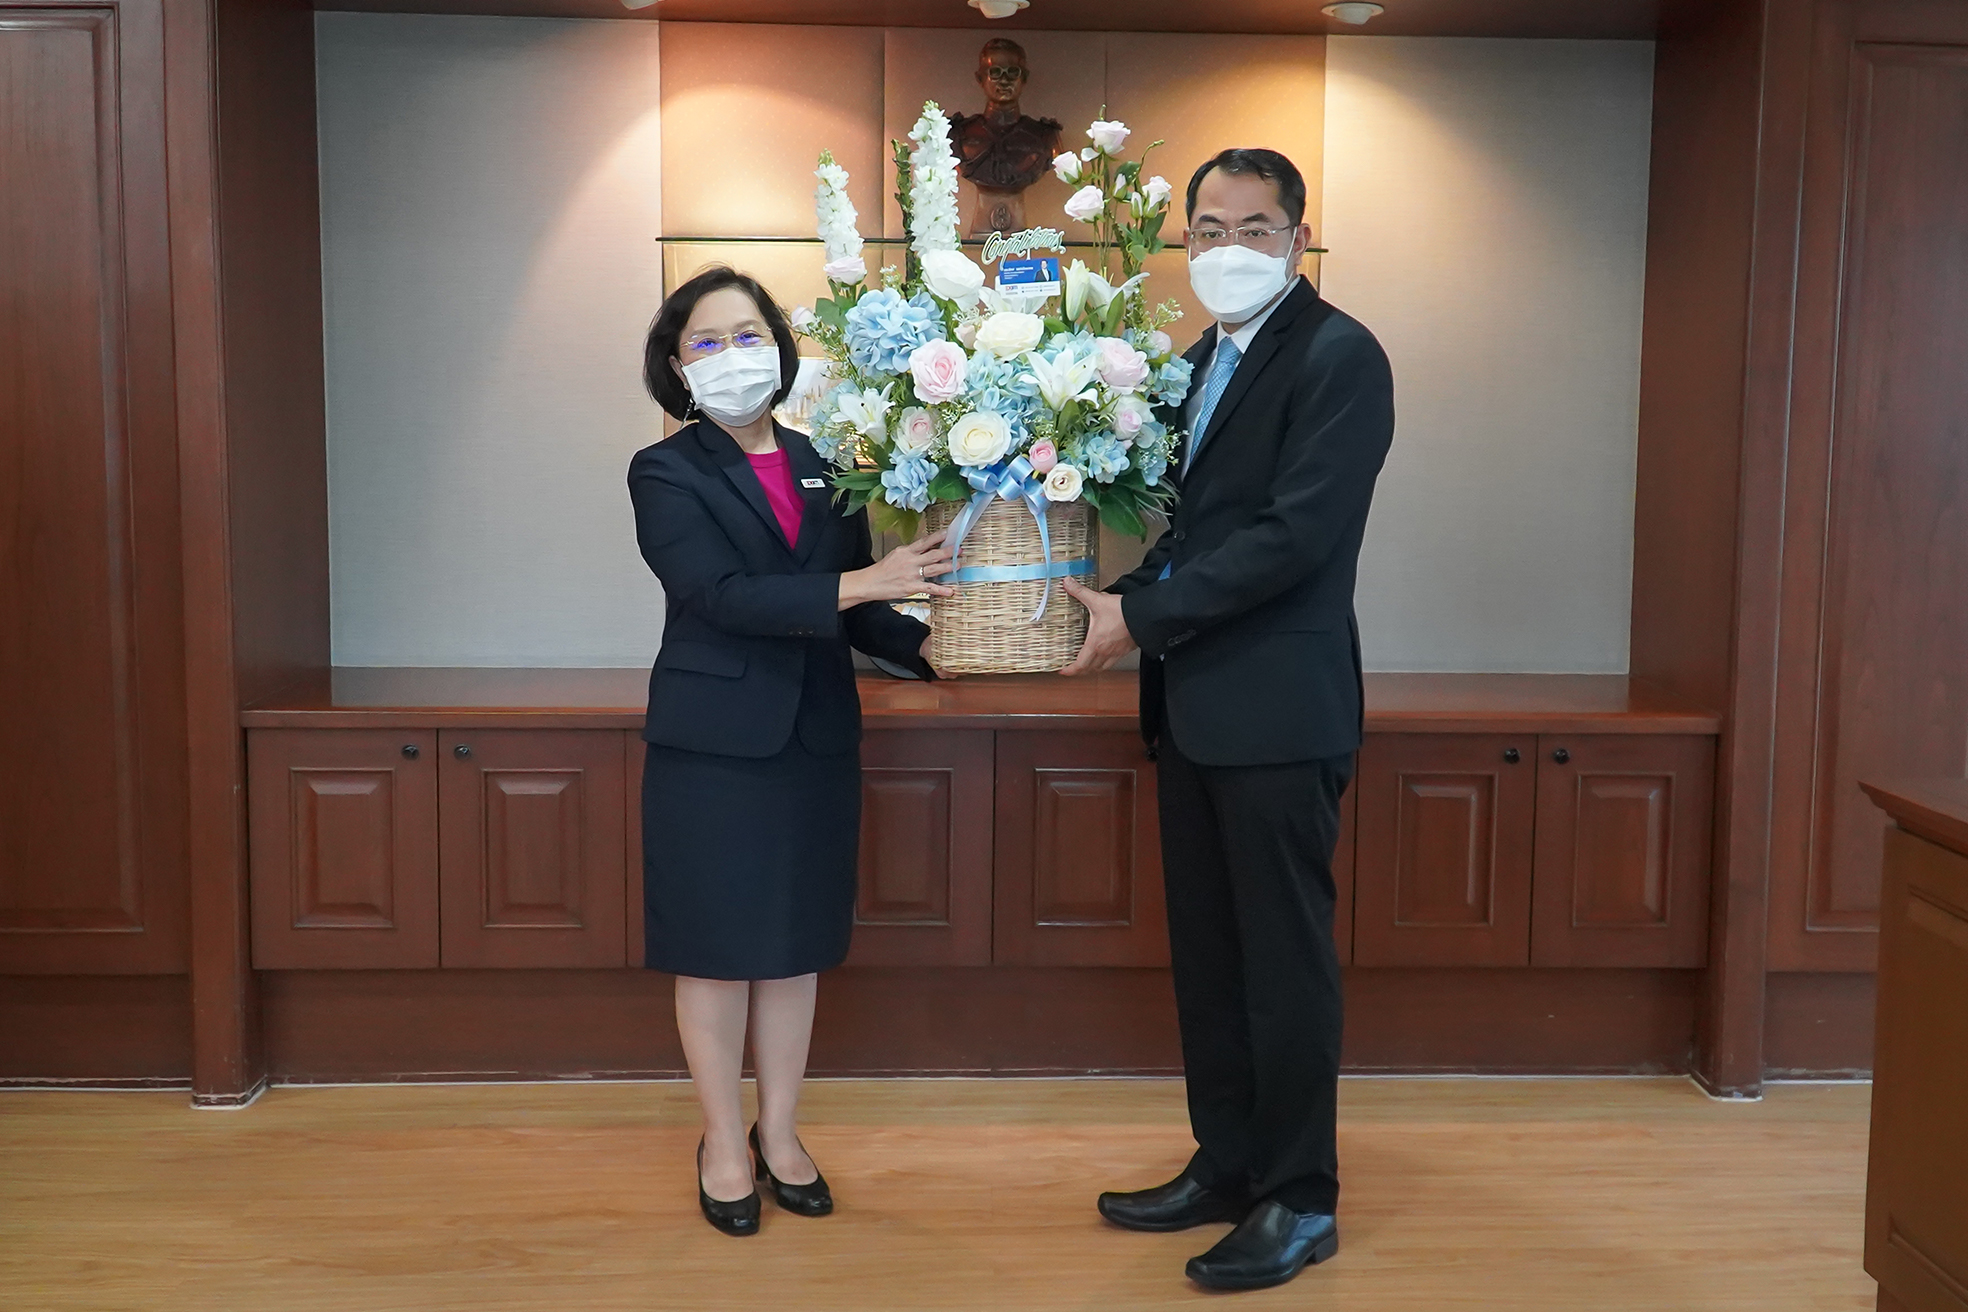 EXIM Thailand Congratulates Director General of the Port Authority of Thailand